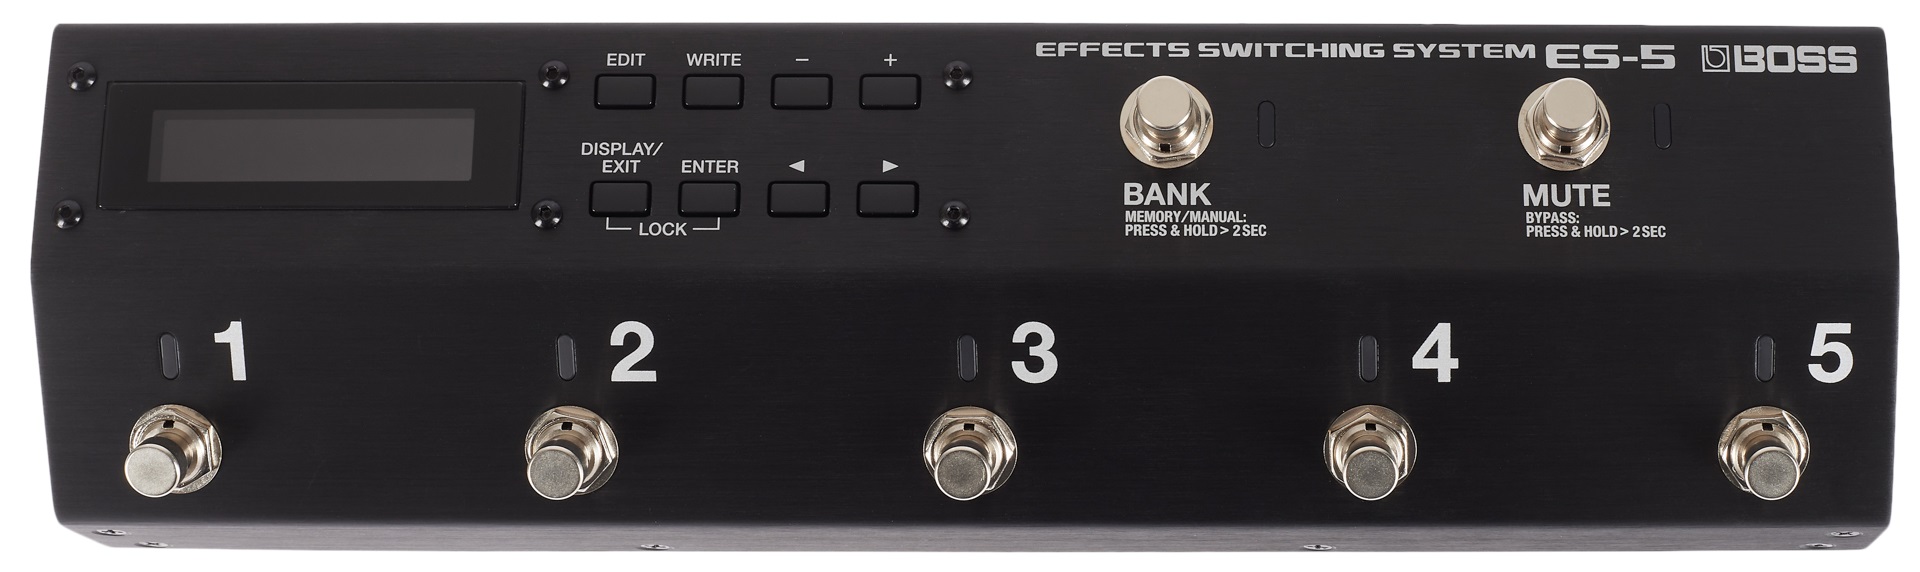 Fotografie Boss ES 5 Effects Switching System Boss